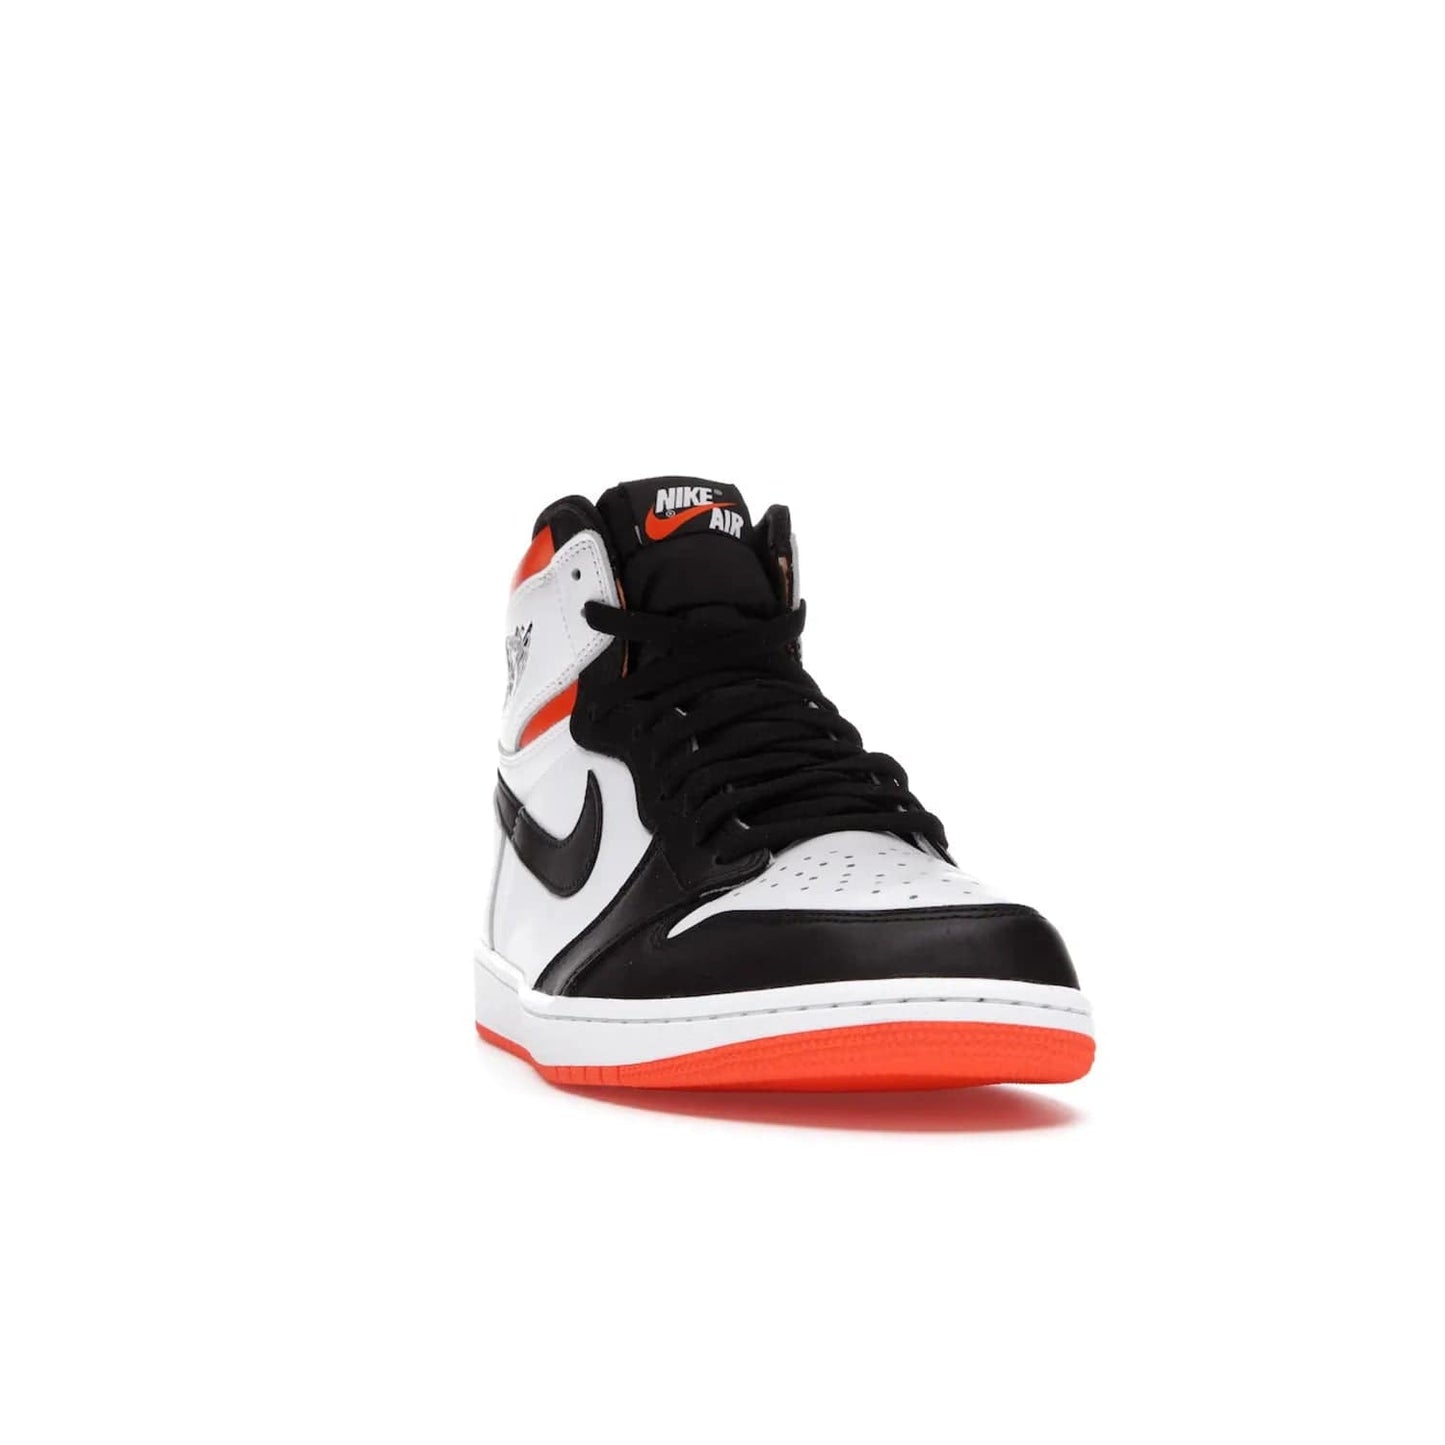 Jordan 1 Retro High Electro Orange - Image 8 - Only at www.BallersClubKickz.com - This Air Jordan 1 Retro High Electro Orange features a white leather upper with black overlays and vibrant Hyper Orange ankle wrap. Turn heads with this iconic design of woven tongue label and sole. Get yours today and add some serious style to your rotation.